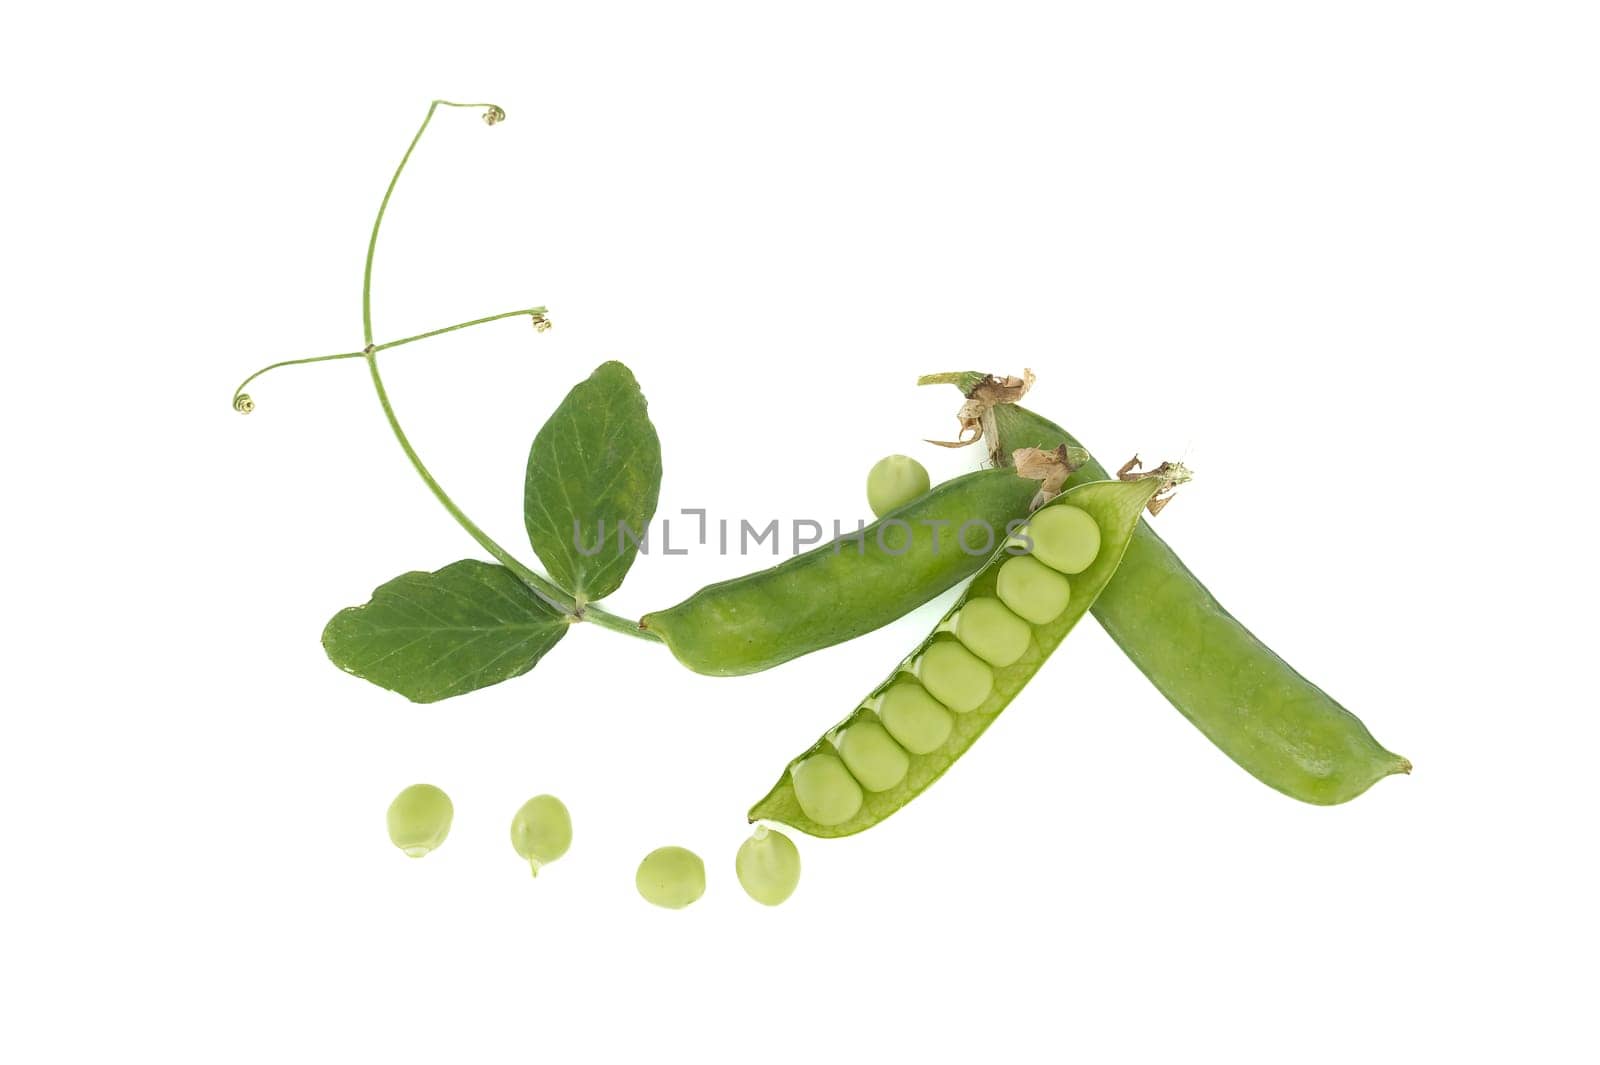 Pea pods, few peas and open pea pod and round green peas inside in close up isolated on white background